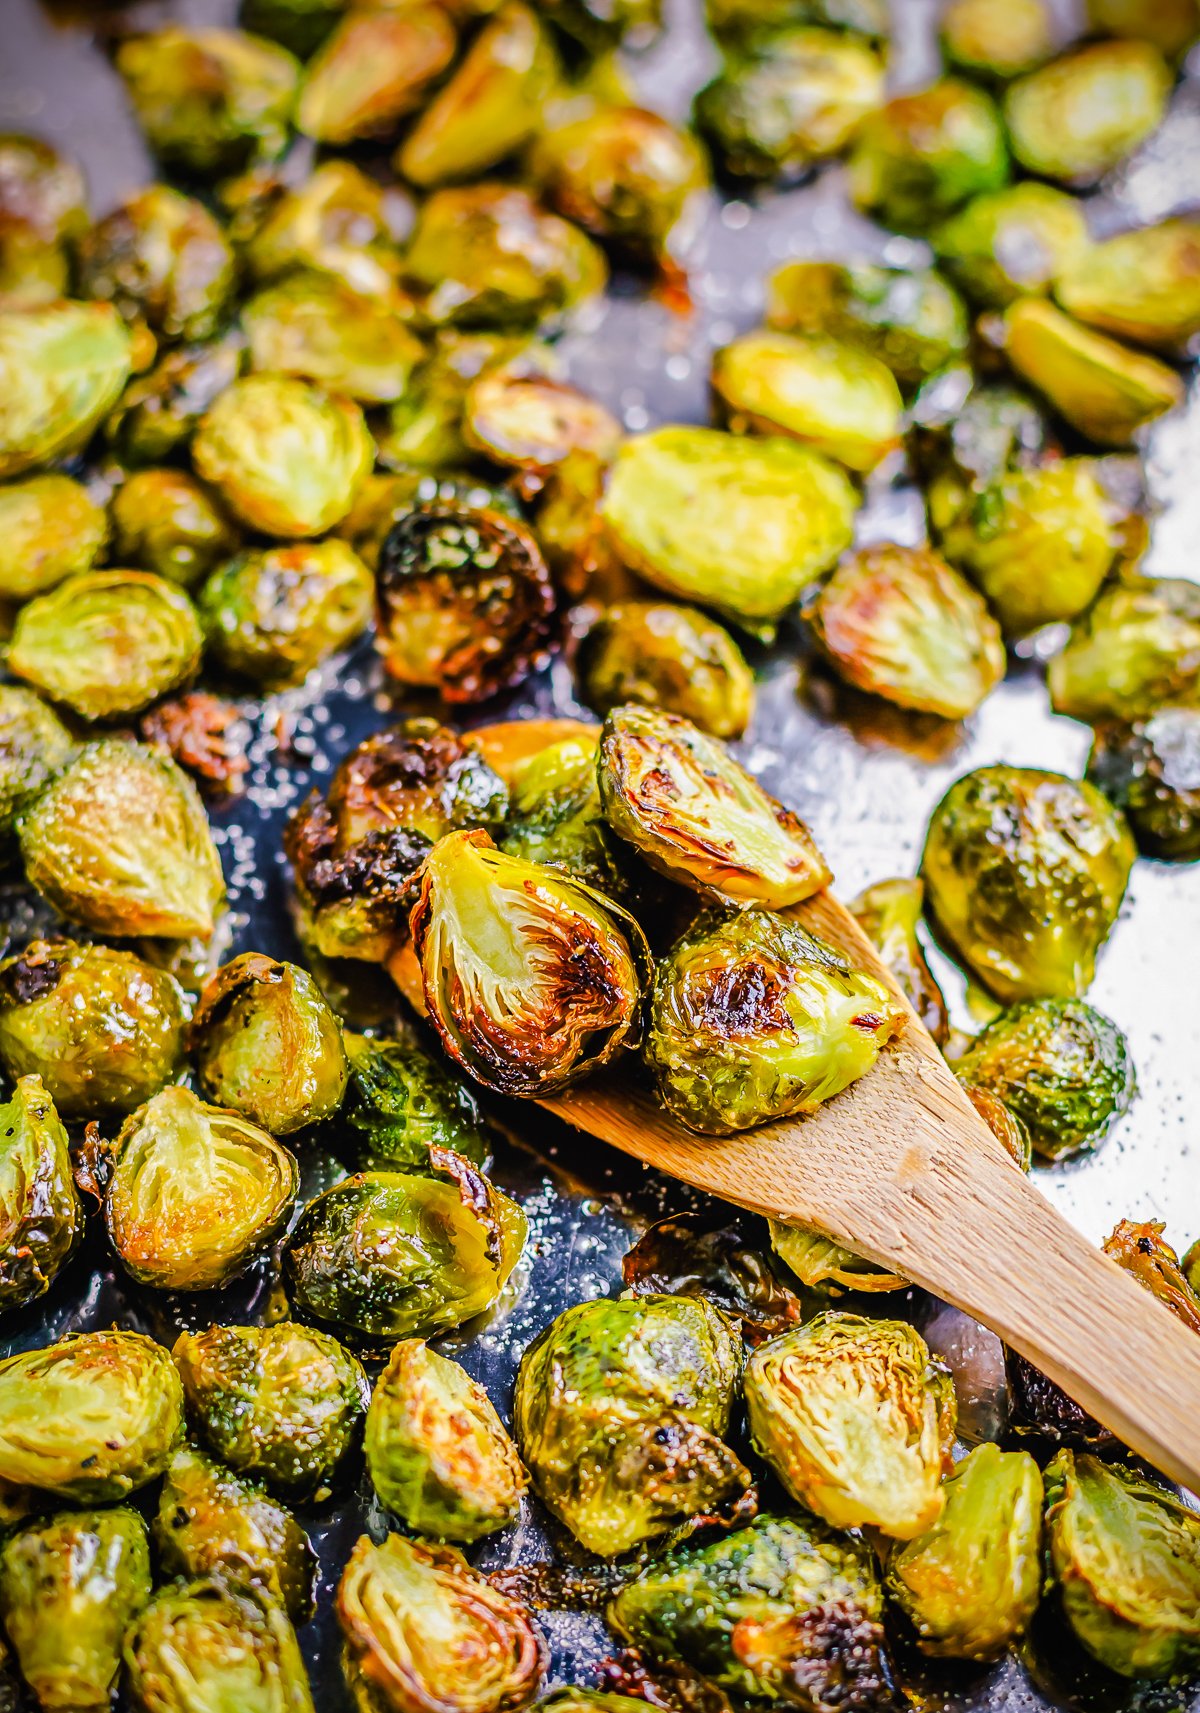 Oven Roasted Brussel Sprouts on baking sheet with some on wooden spoon,